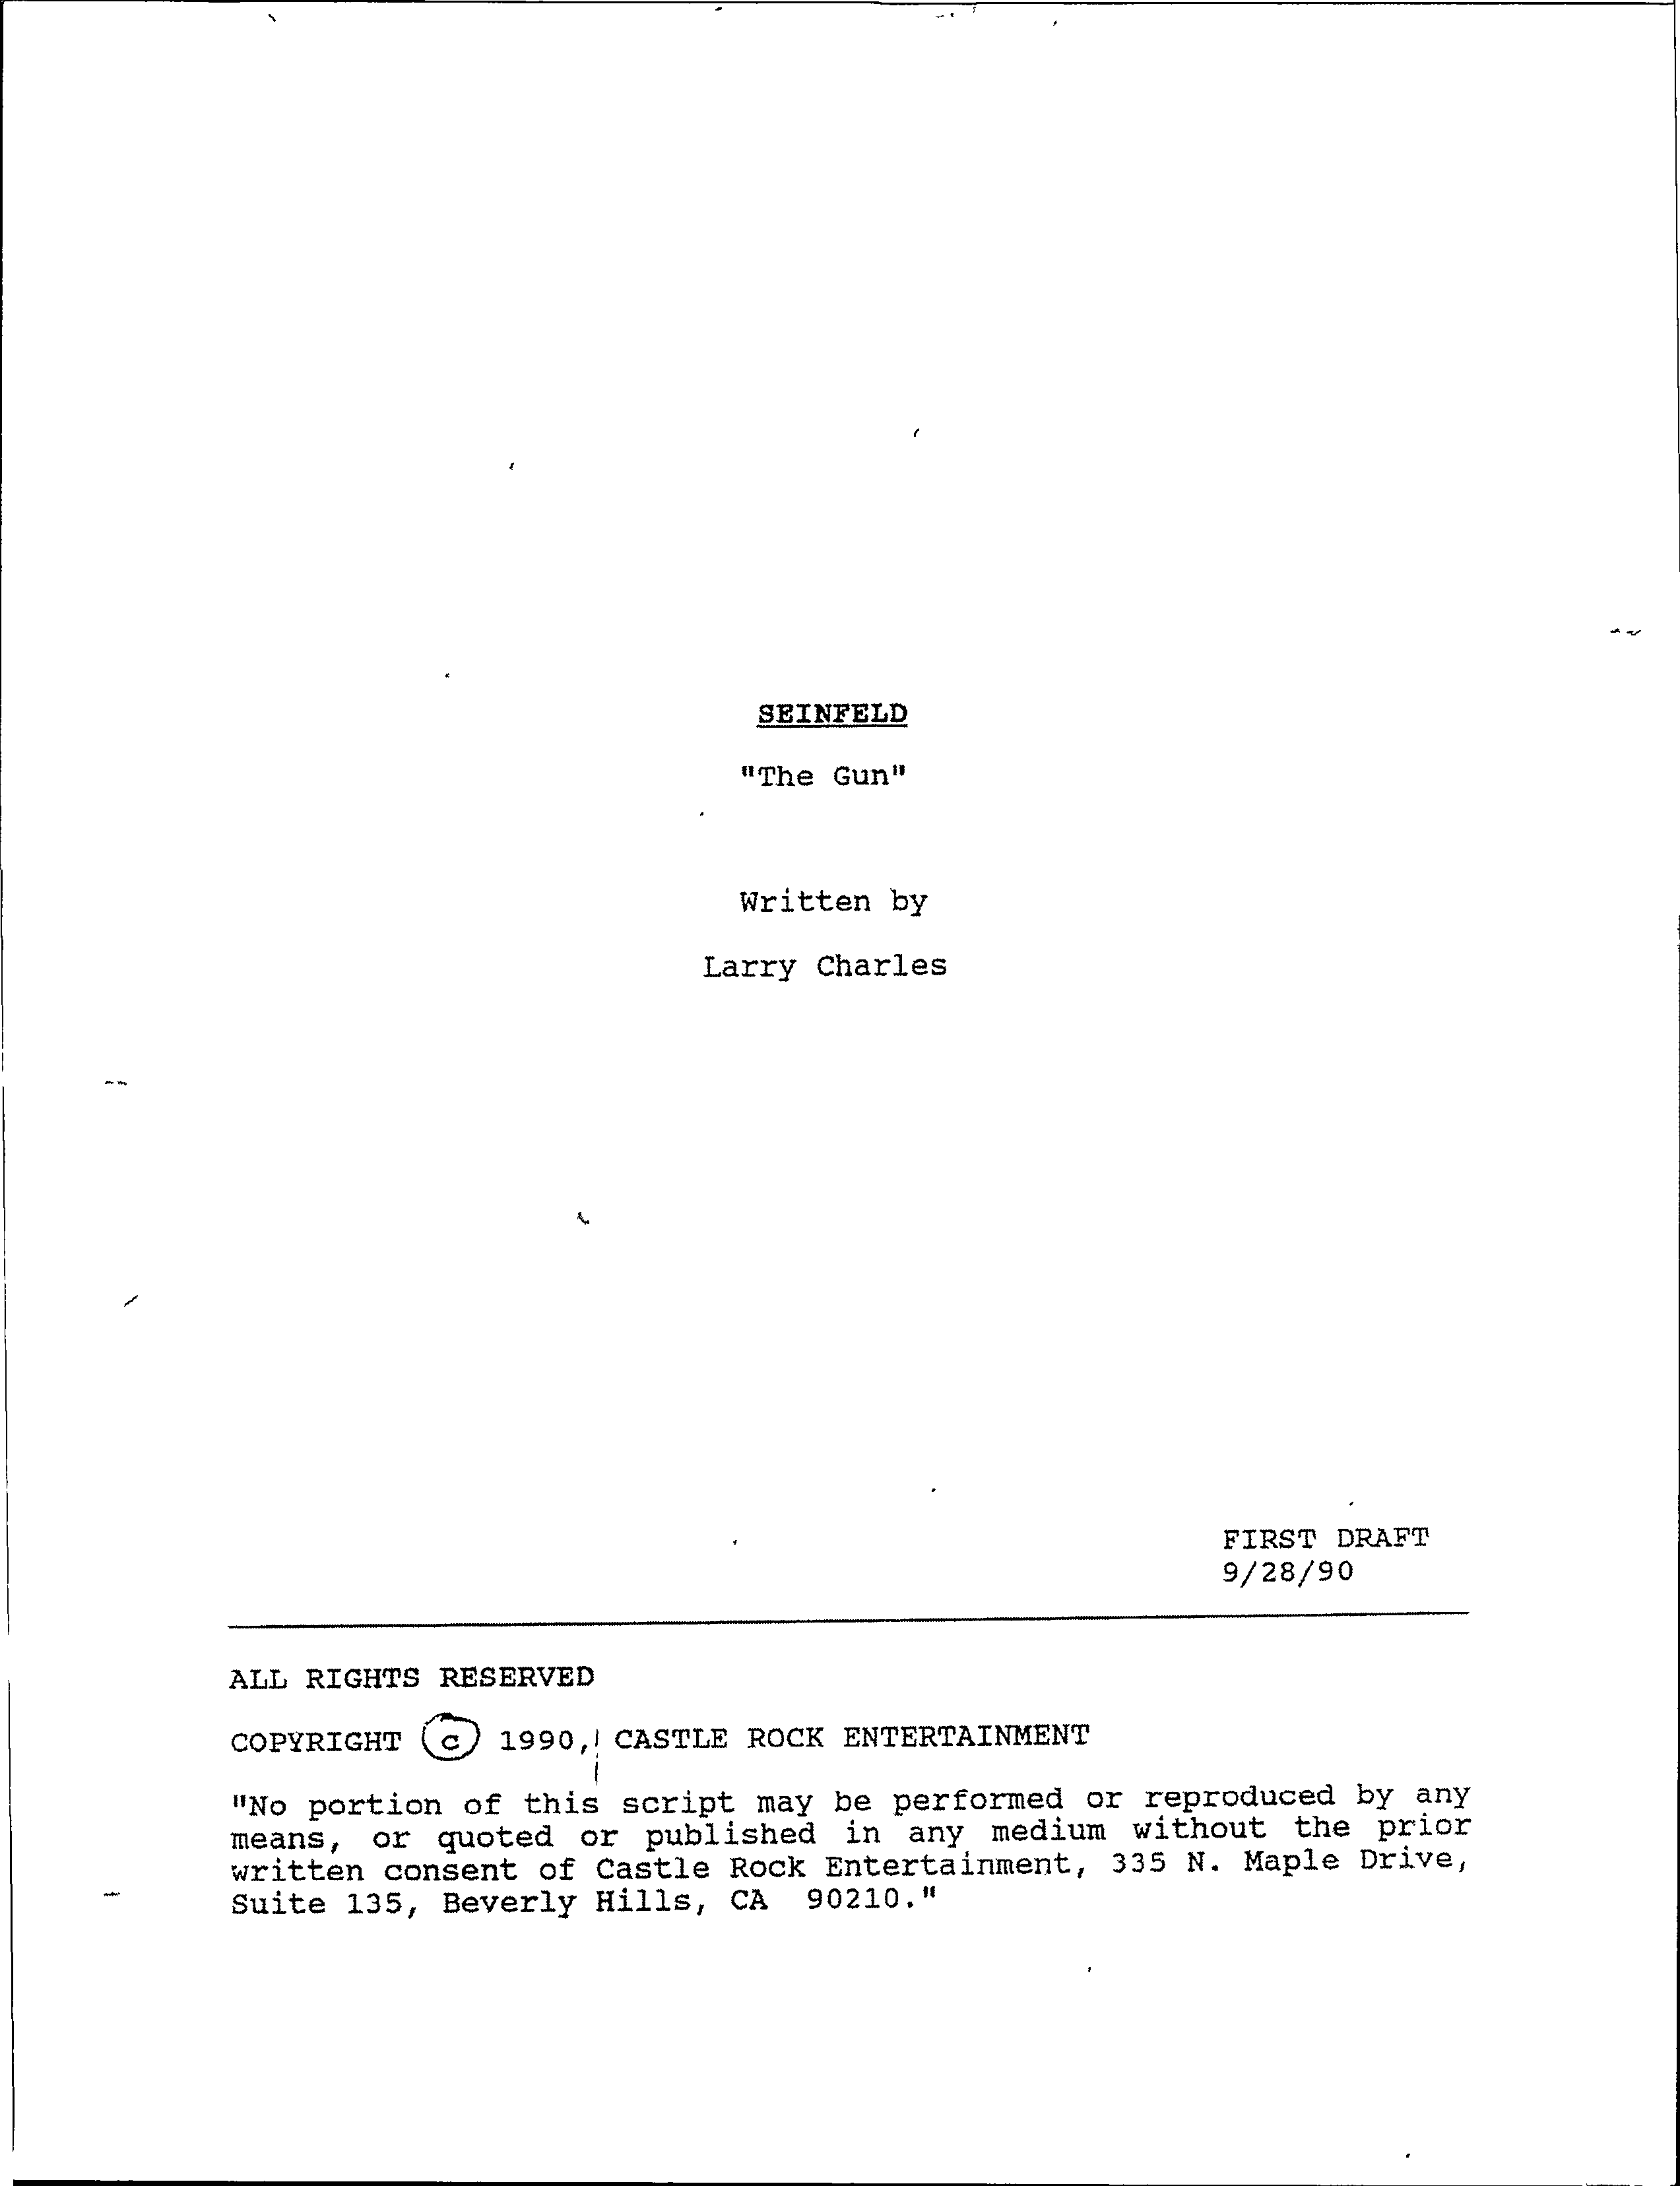 Seindfeld "The Bet/Gun" (Script) - Seinfeld "The Bet" (lost production material of cancelled episode of NBC sitcom; 1990s)